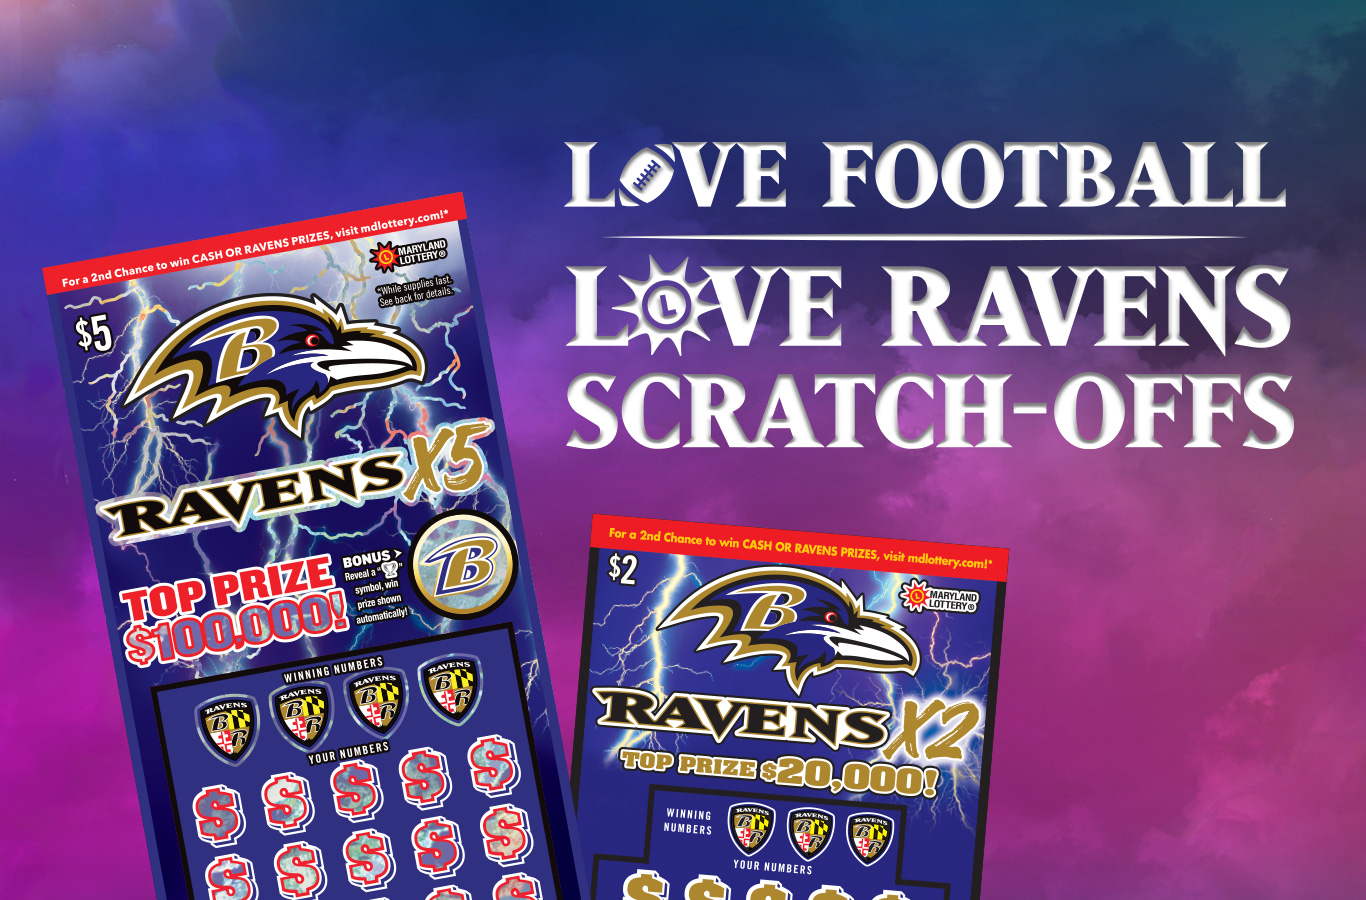 LOVE WINNING! Enter non-winning Ravens Scratch-Offs for your chance to win second-chance cash and Ravens fan experiences.